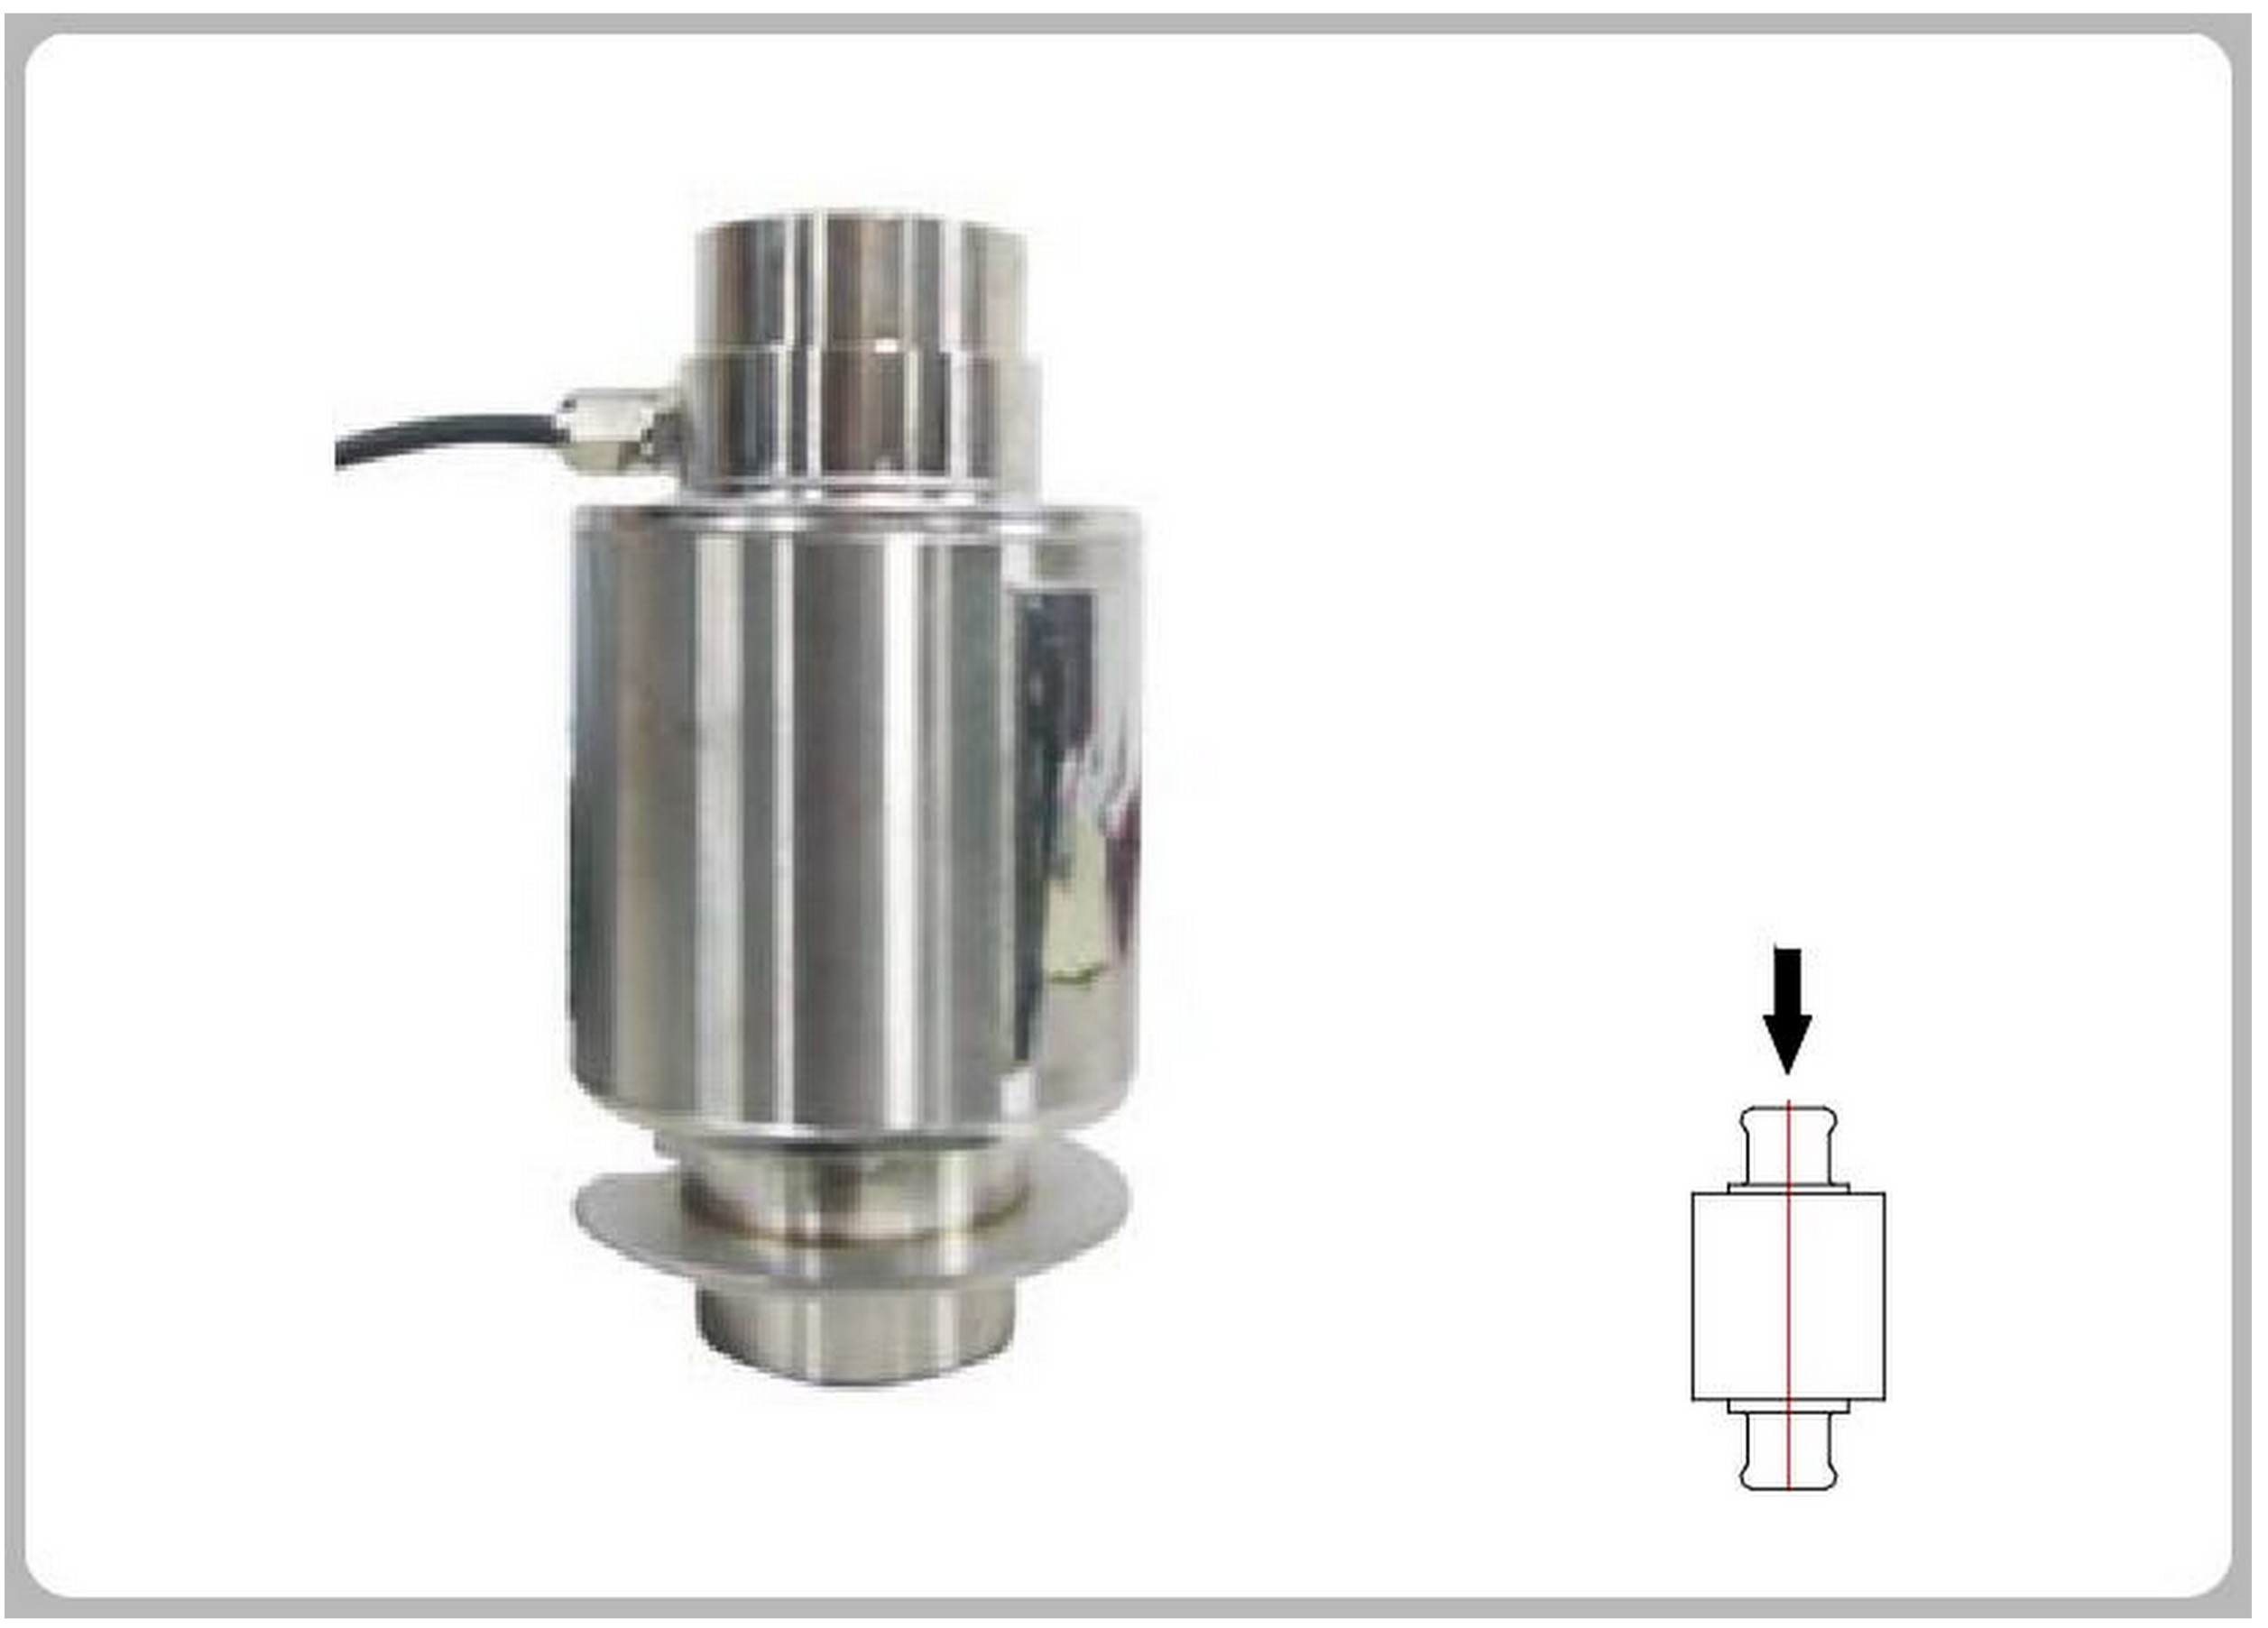 MC8210 LOAD CELL & FORCE TRANSDUCER